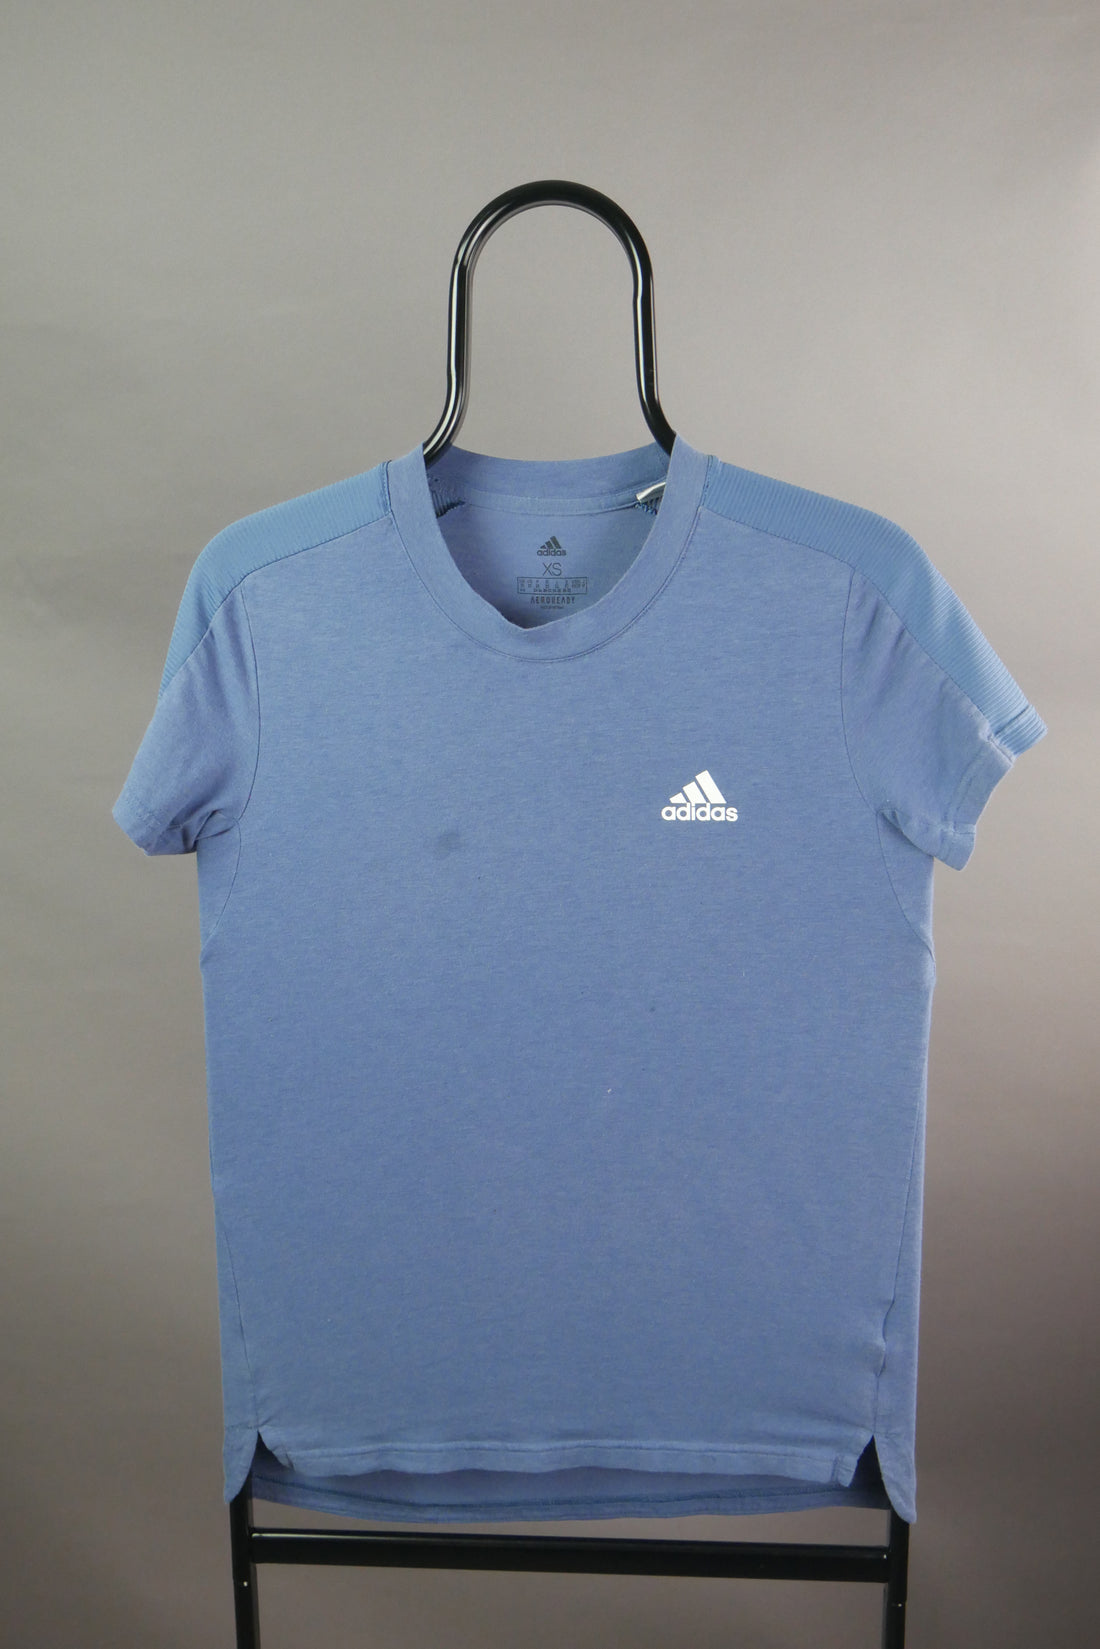 The Adidas Athletic T-shirt (XS)